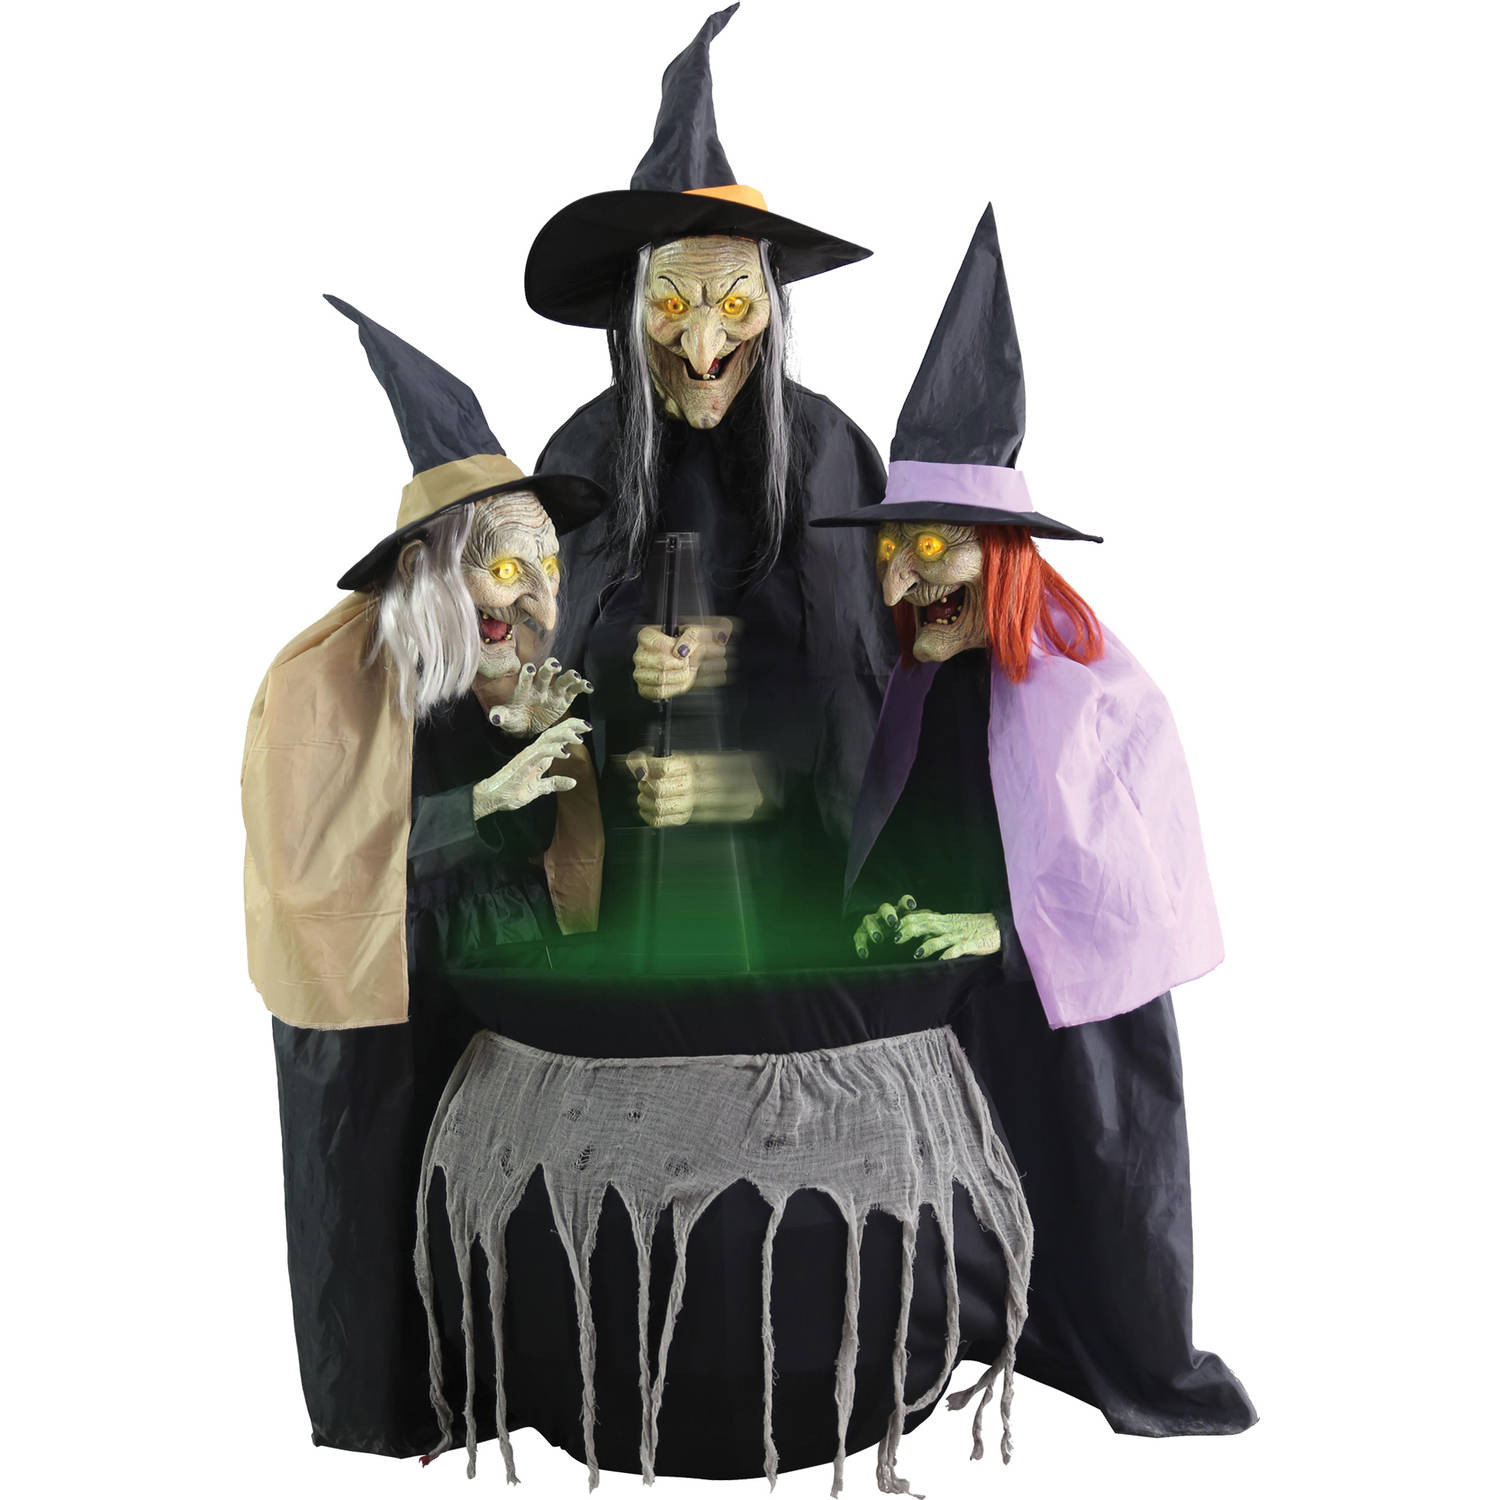 Outdoor Animated Halloween Decorations
 Stitch Witch Sisters Animated Halloween Decoration